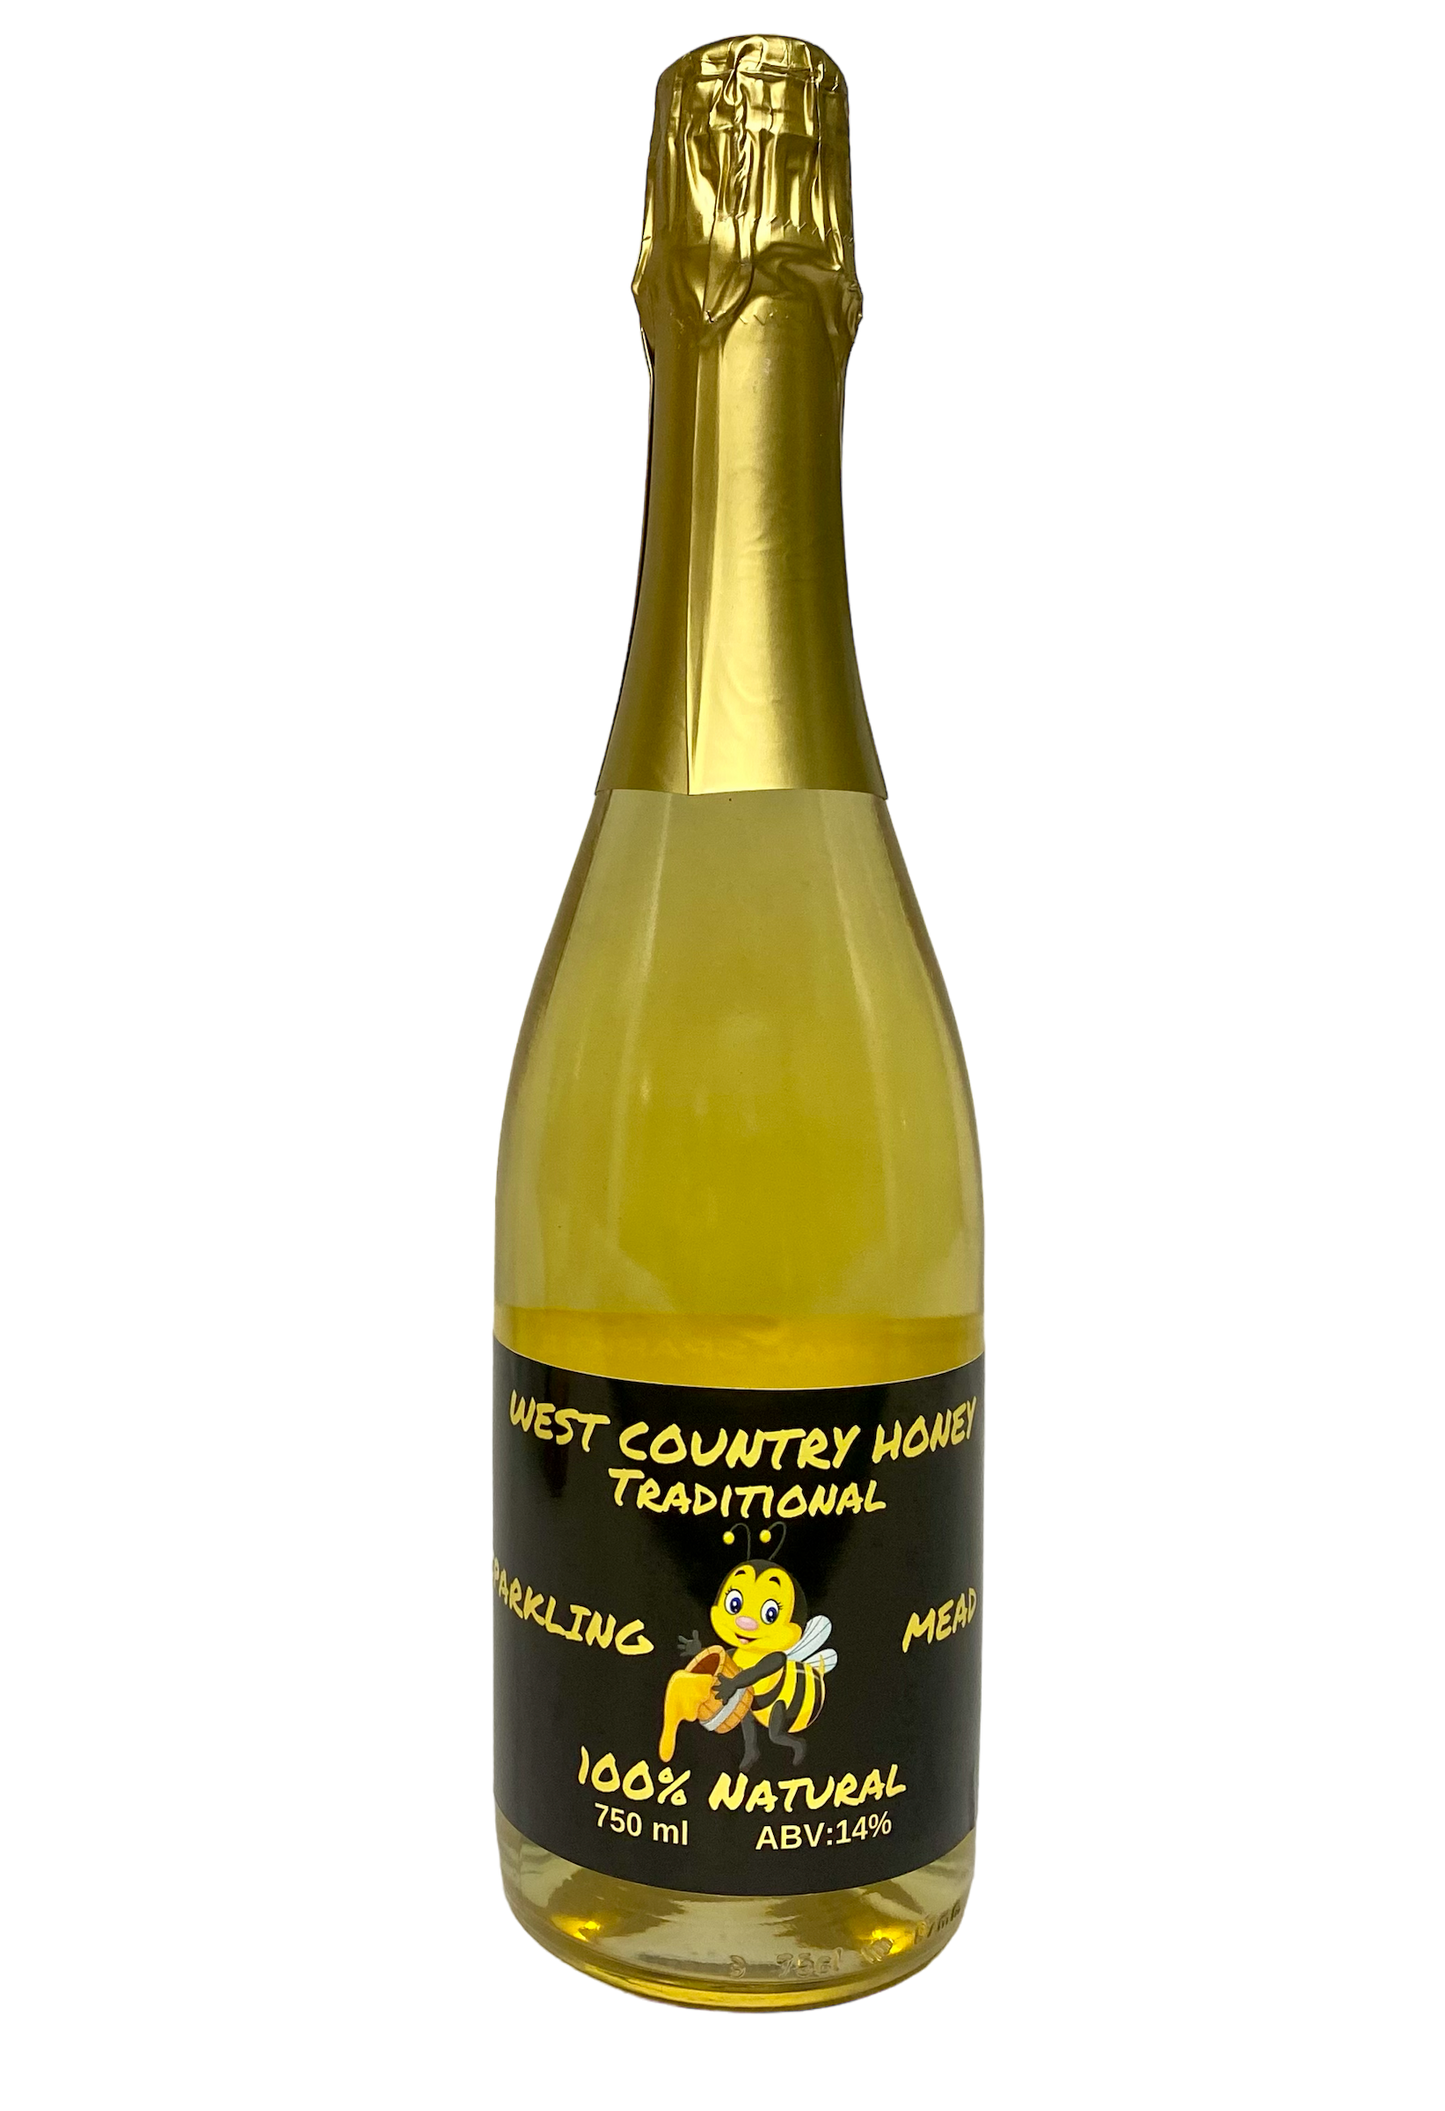 Traditional Sparkling Mead 750ml 11% ABV